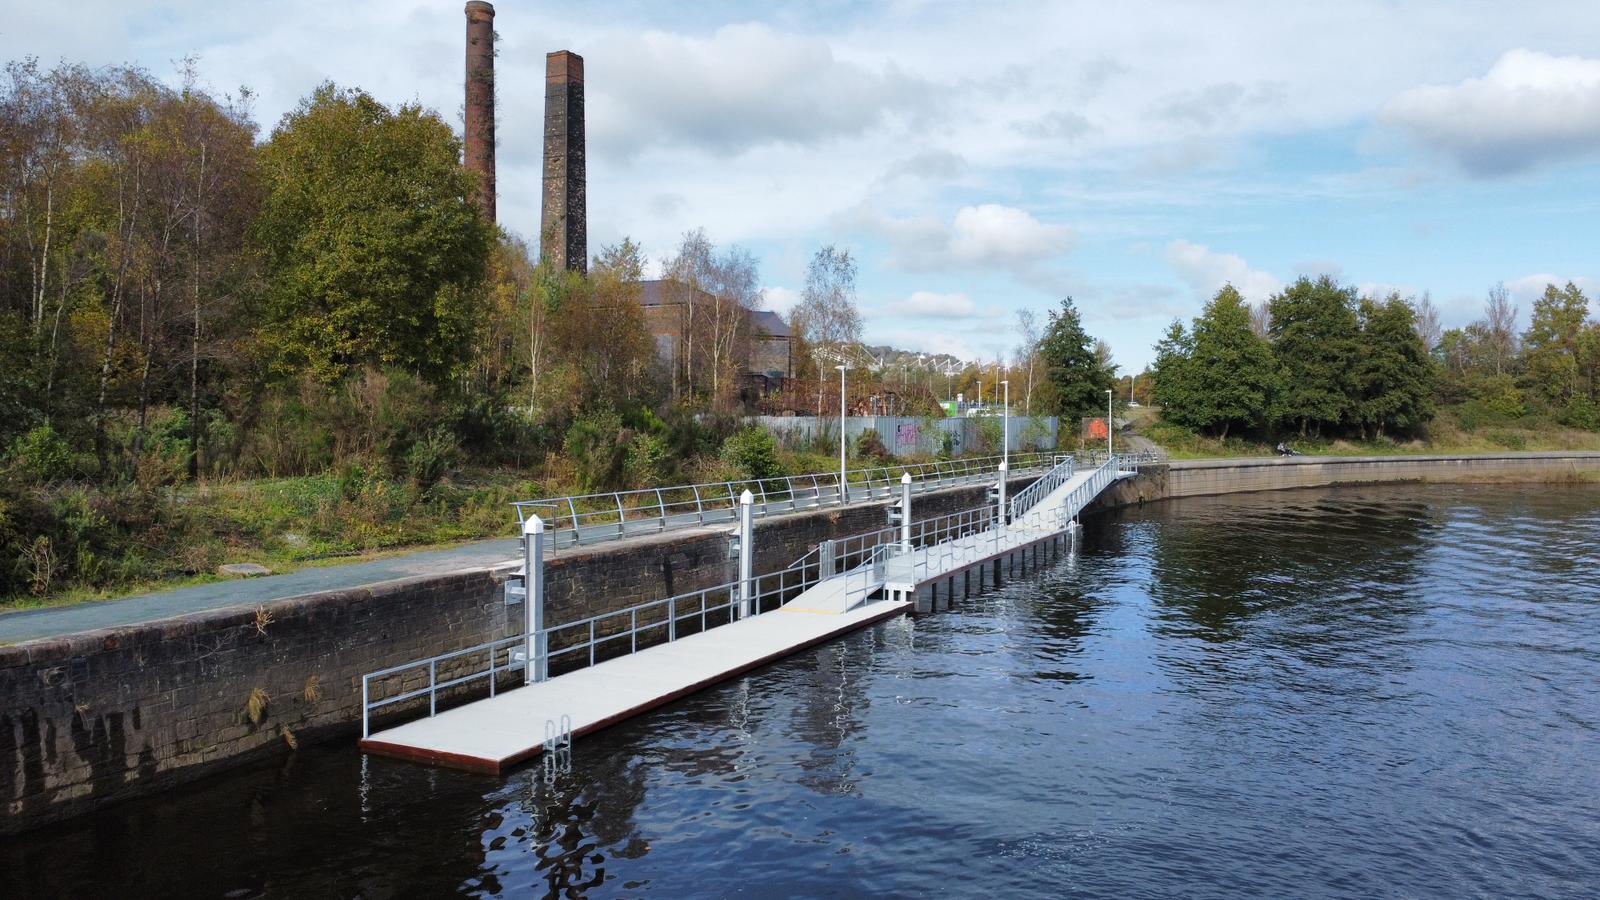 Long split level pontoon on quay wall with background of trees and bank